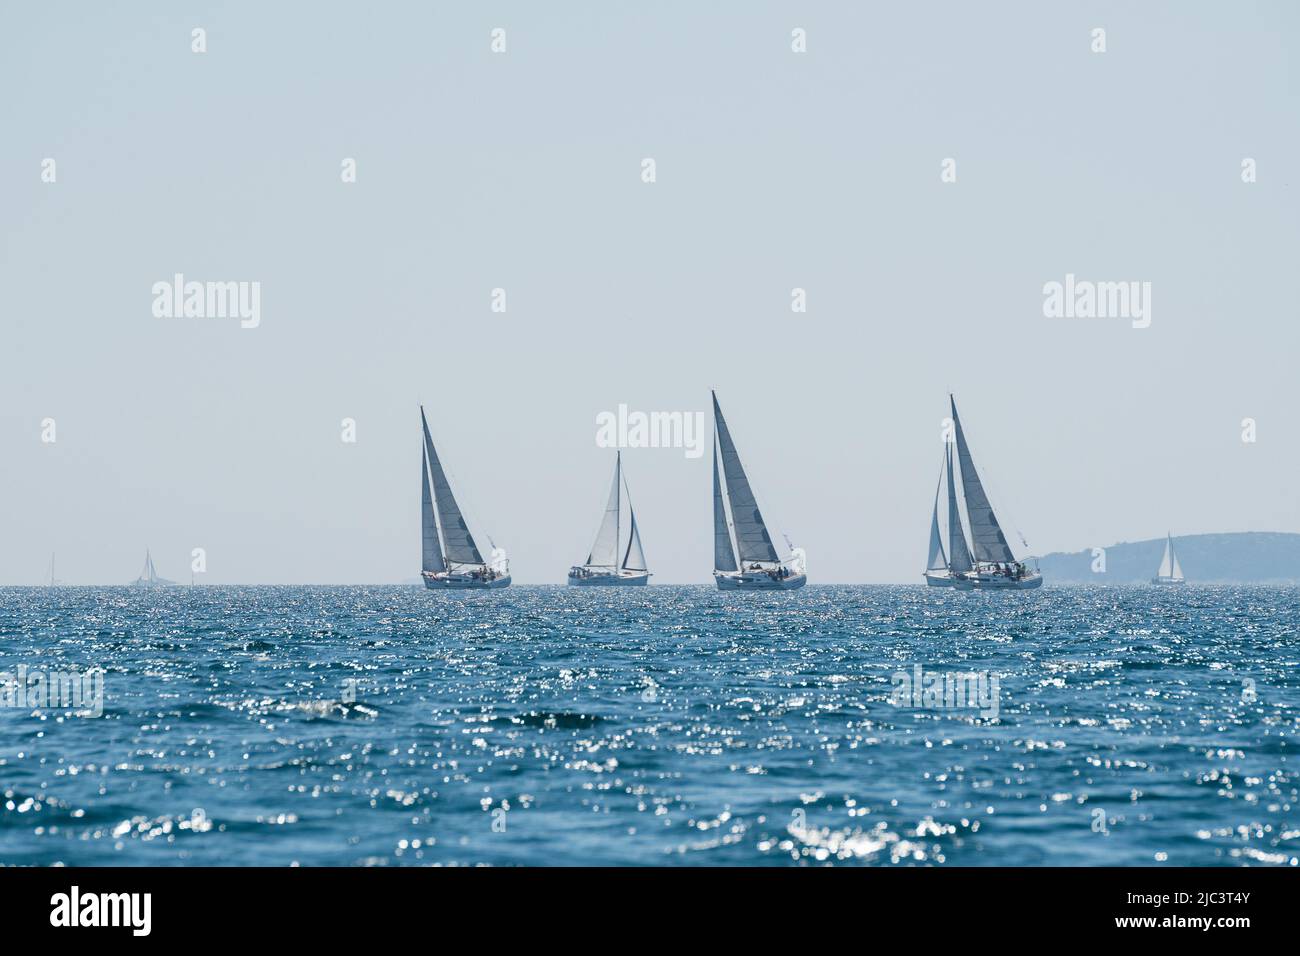 Yachts compete in team sailing event, Croatia Stock Photo